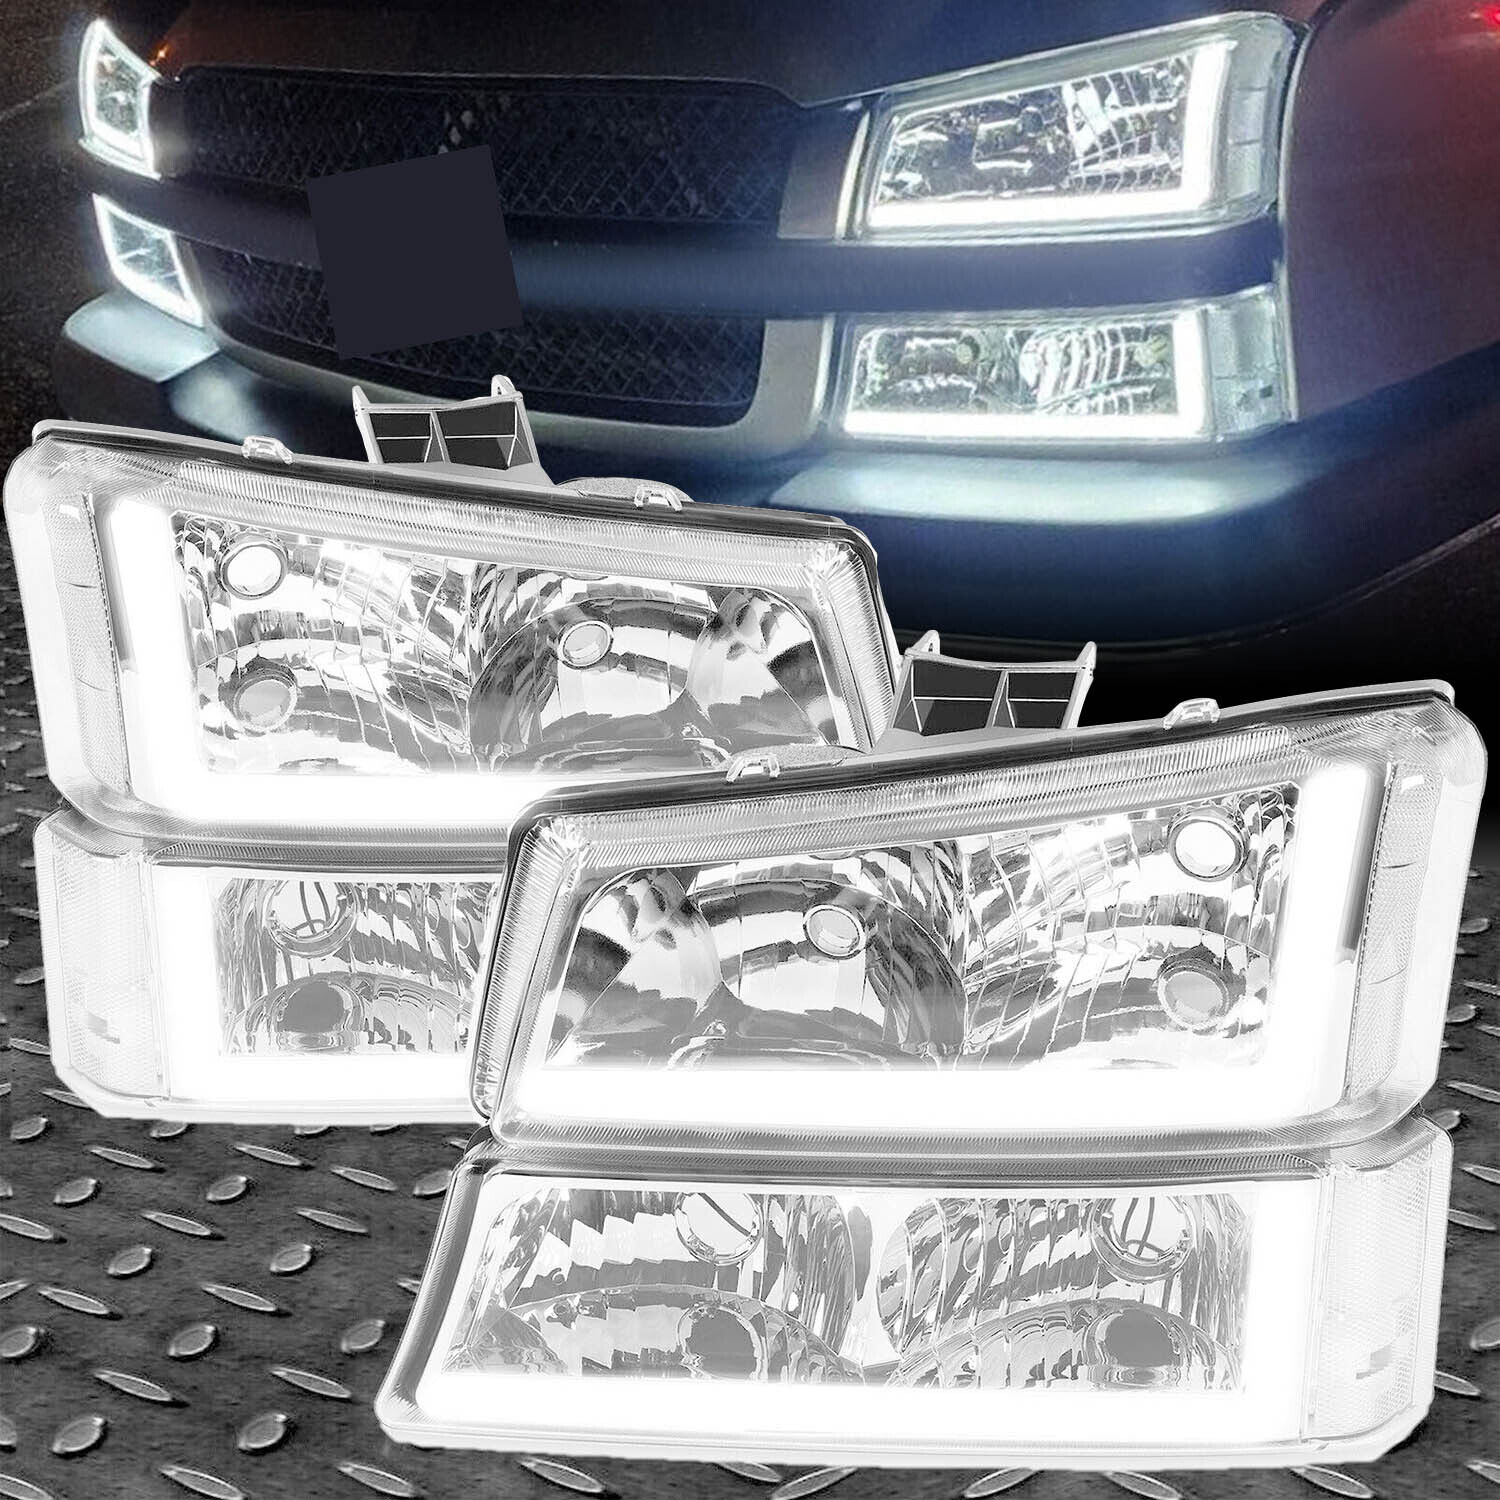 LED DRL Chrome Headlights+Bumper Lamps For 03-07 Chevy Silverado 1500 2500 3500